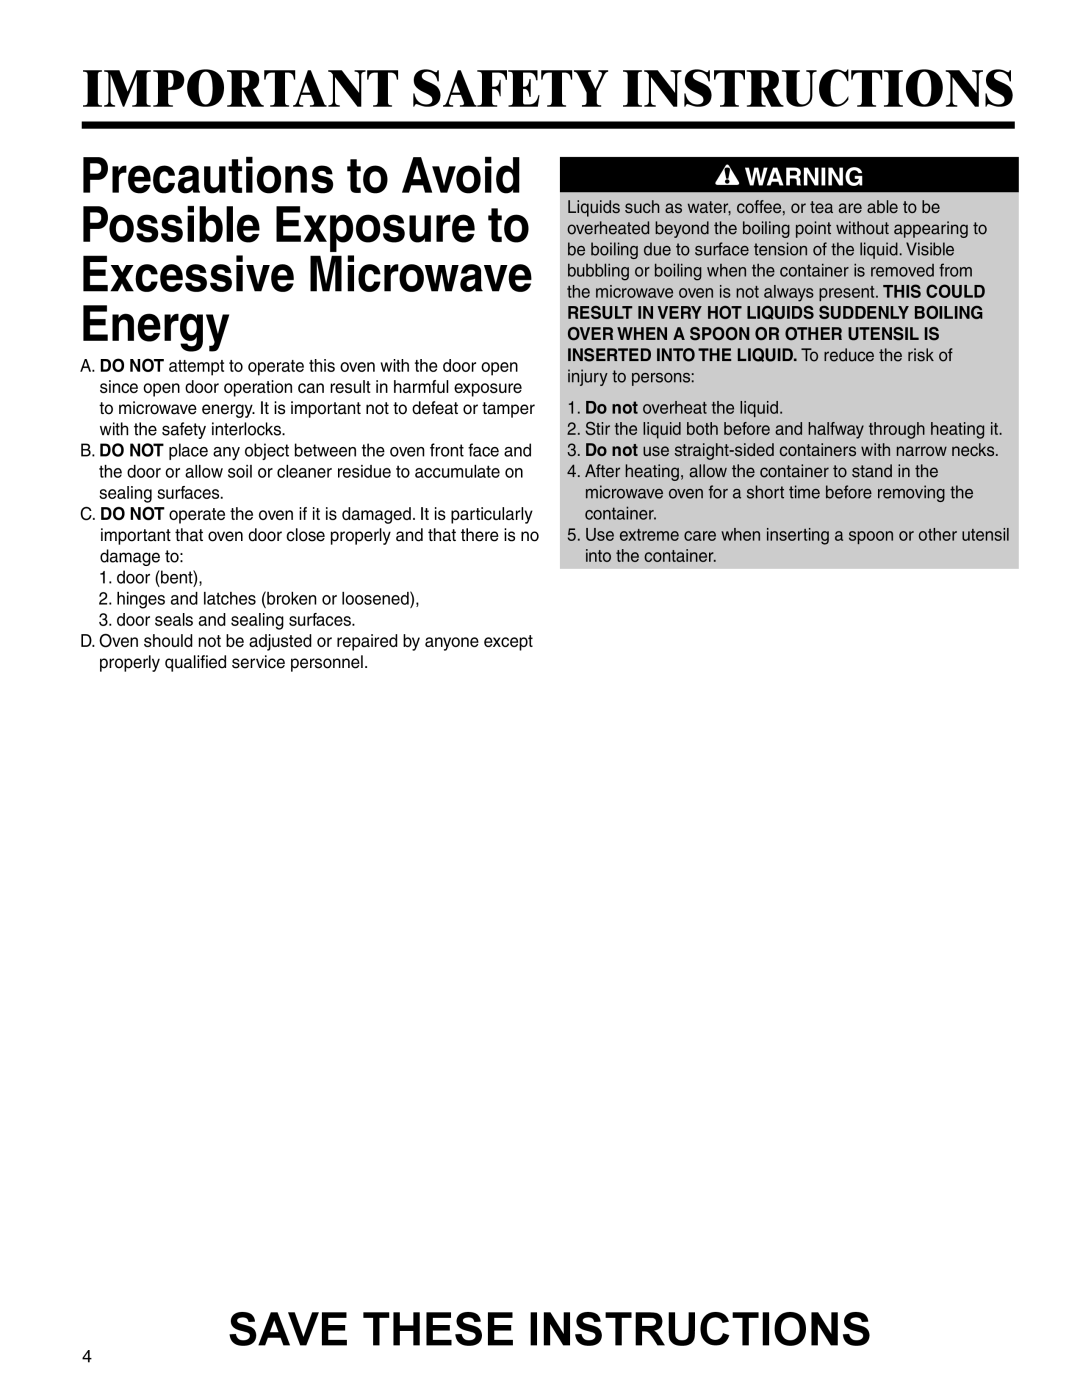 Amana AMV5164BA/BC Precautions to Avoid Possible Exposure to Excessive Microwave Energy, Save These Instructions 